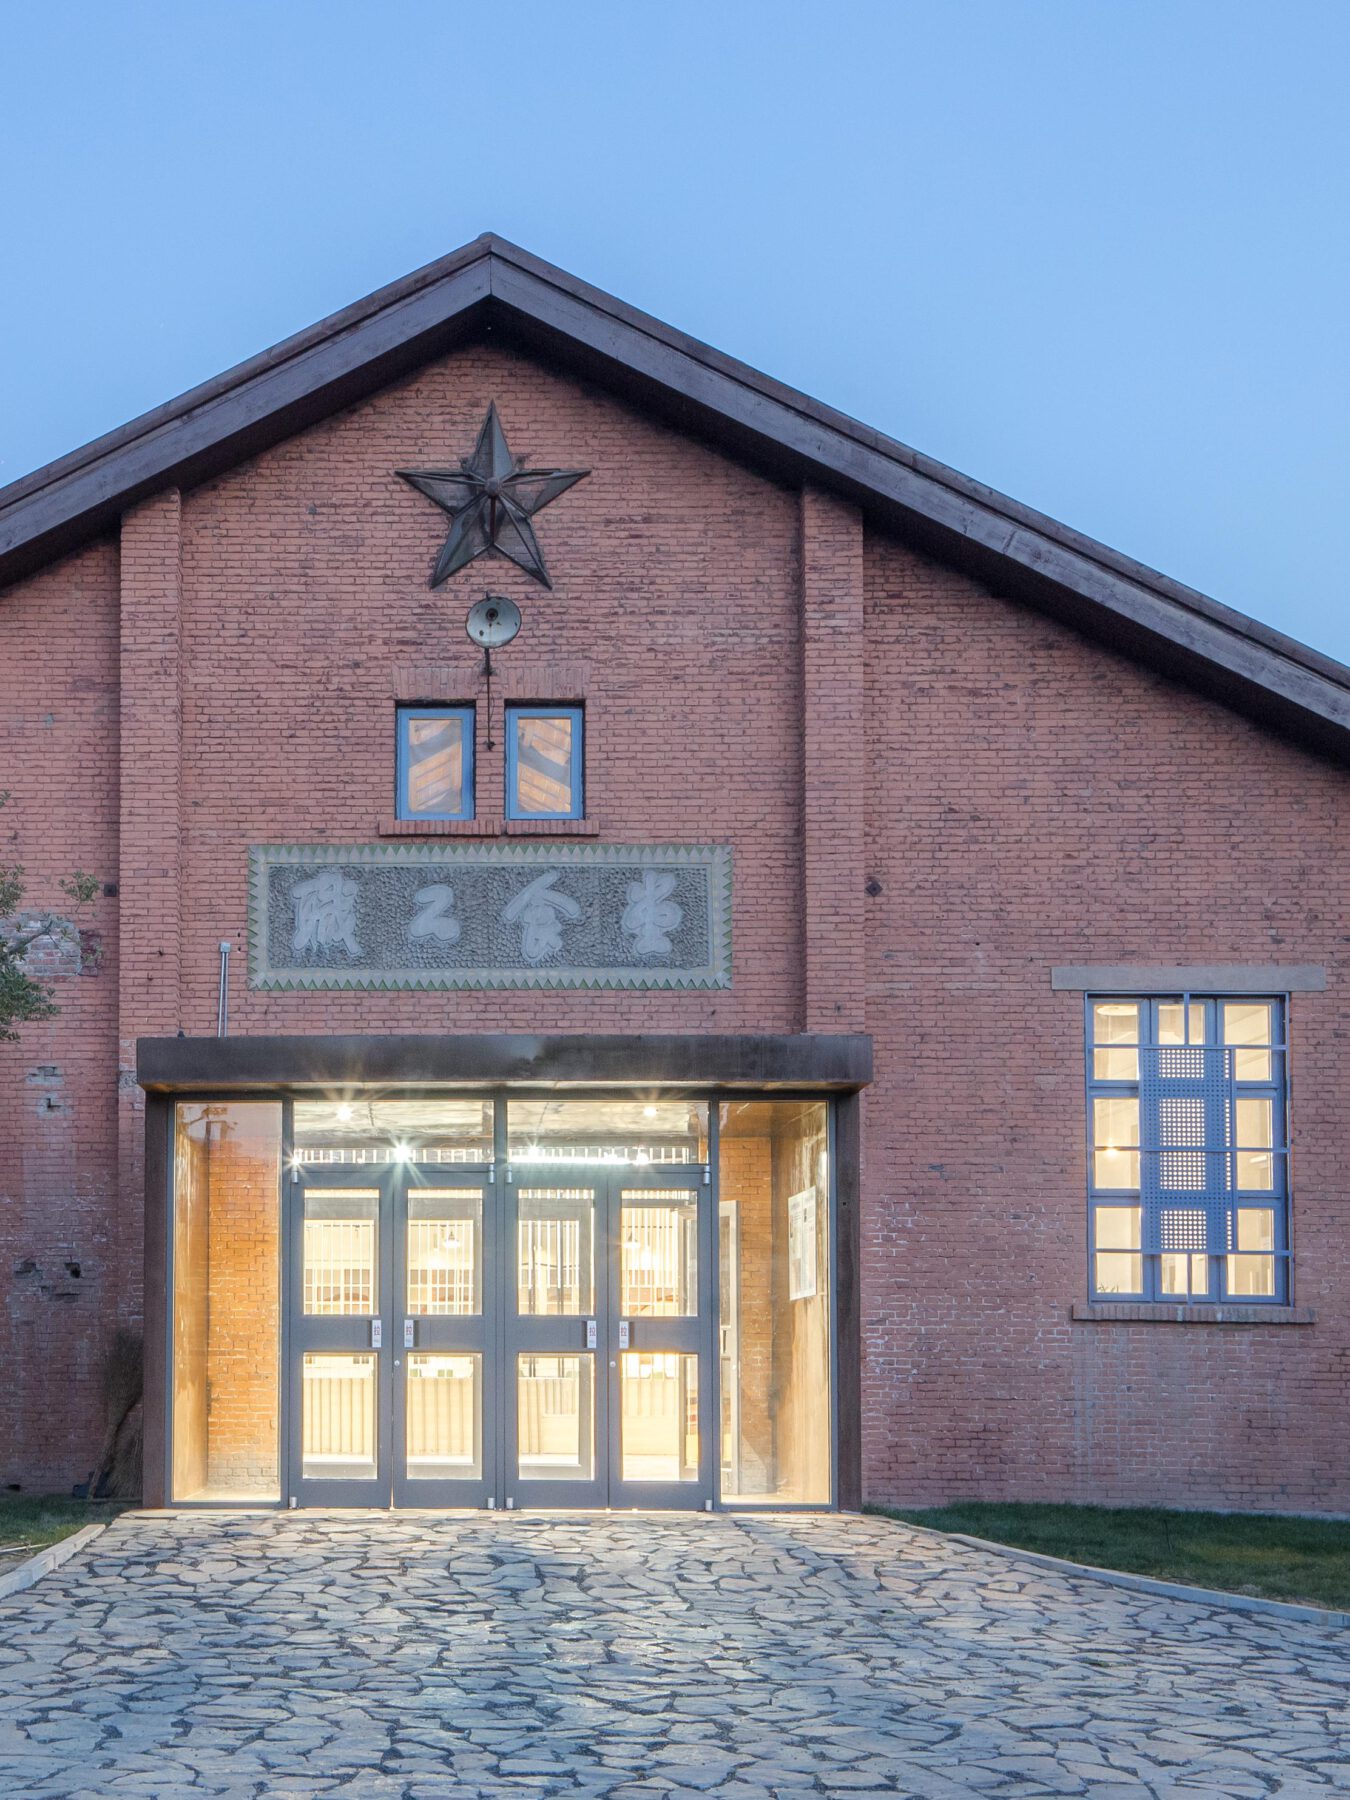 Archisearch Architect Aurelien Chen reinterprets China’s 'Red Era' in the refurbishment of 'Former miner’s canteen' in Shijiazhuang, China